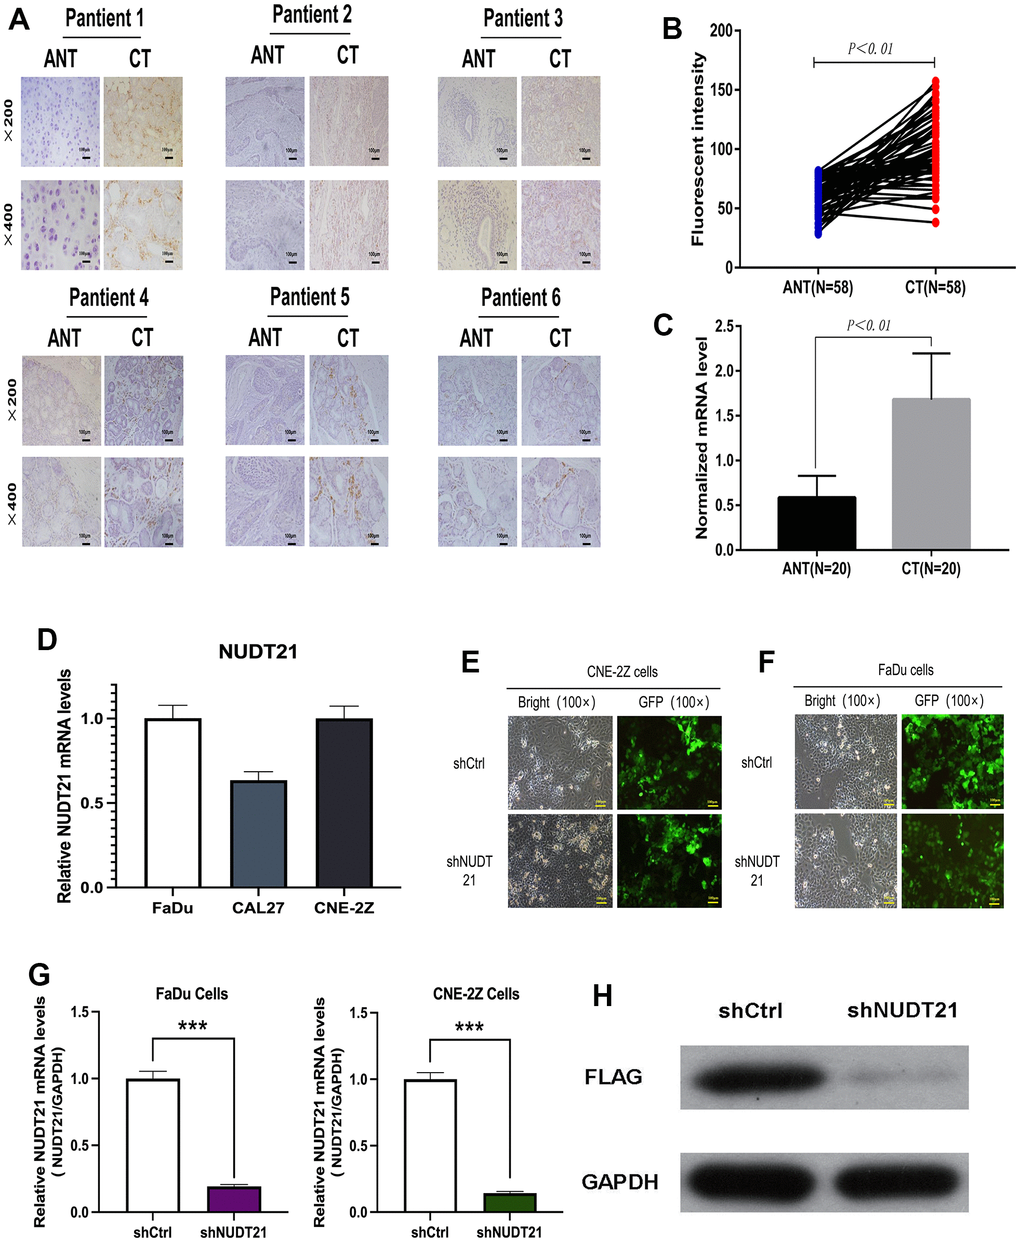 Upregulation of NUDT21 expression levels in HHNSCC and knockdown of NUDT21 by lentivirus-mediated RNAi system. (A–C) NUDT21 protein expression levels as well as gene levels in cancer tissues (CT) and paired adjacent non-tumor tissues (ANT) of 58 pairs of patients from the Second Hospital of Jilin University Cancer Center were counted by immunofluorescence method. Results included 58 pairs of patients (PD) Relative NUDT21 mRNA levels in three head and neck cancer cell lines (FaDu, CNE-2Z and CAL27). (E) Fluorescence photographs of FaDu and CNE-2Z cells infected by lentivirus (100×). (F, G) Identification of NUDT21 knockdown efficiency in FaDu and CNE-2Z cells by RT-PCR. (H) Identification of NUDT21 knockdown efficiency by FLAG protein blotting in FaDu cells. (shCtrl: control lentivirus; shNUDT21: lentivirus containing shRNA targeting NUDT21). **P 